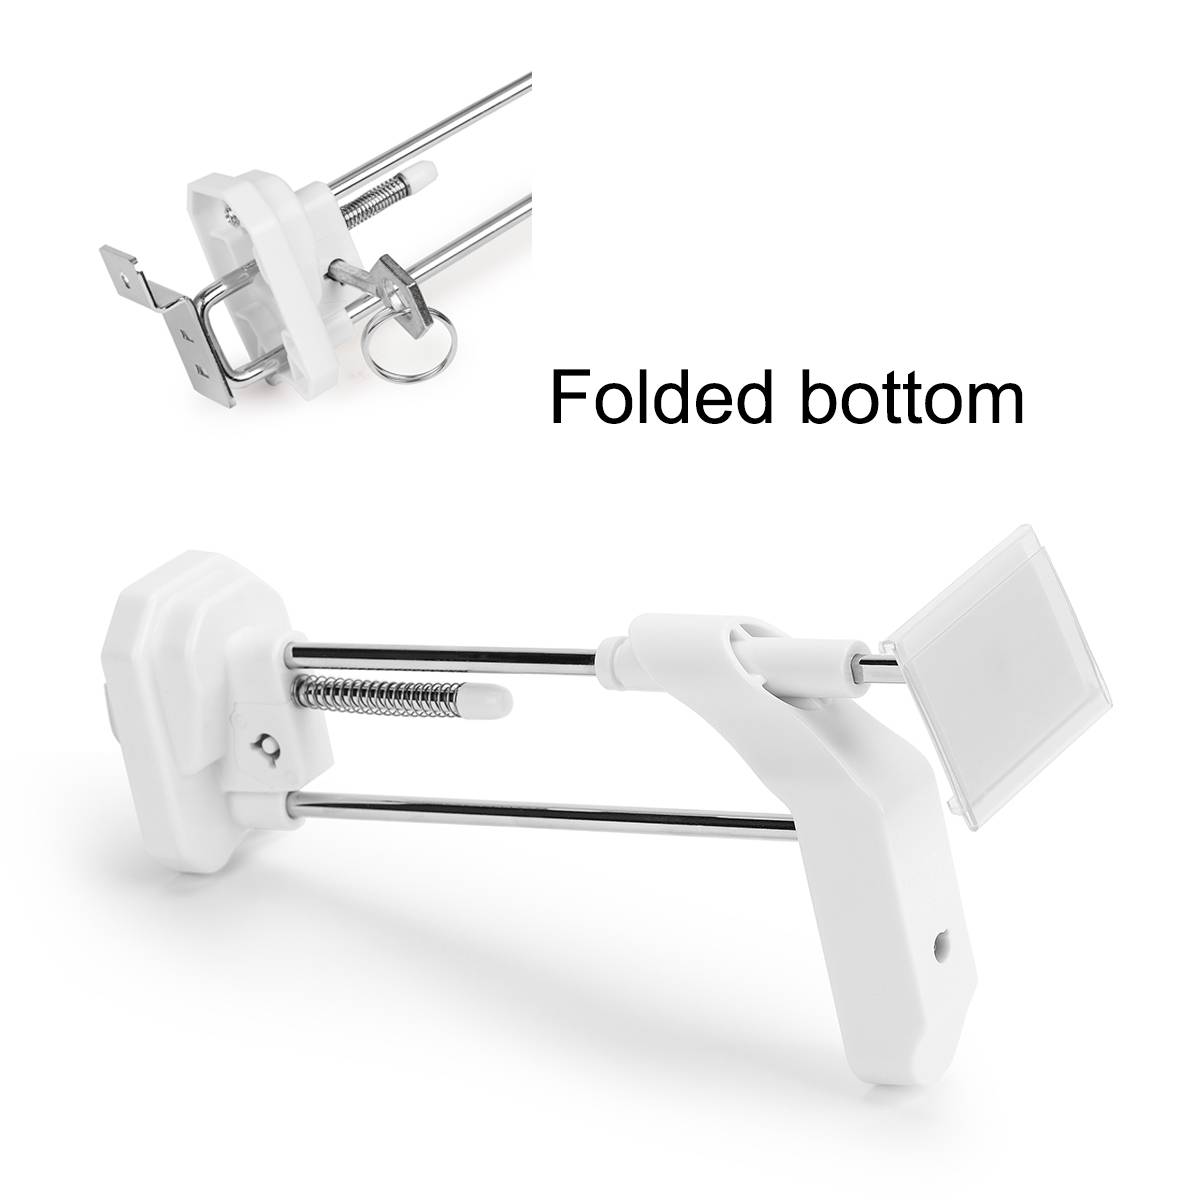 Patent Security hook with Folded bottom Featured Image